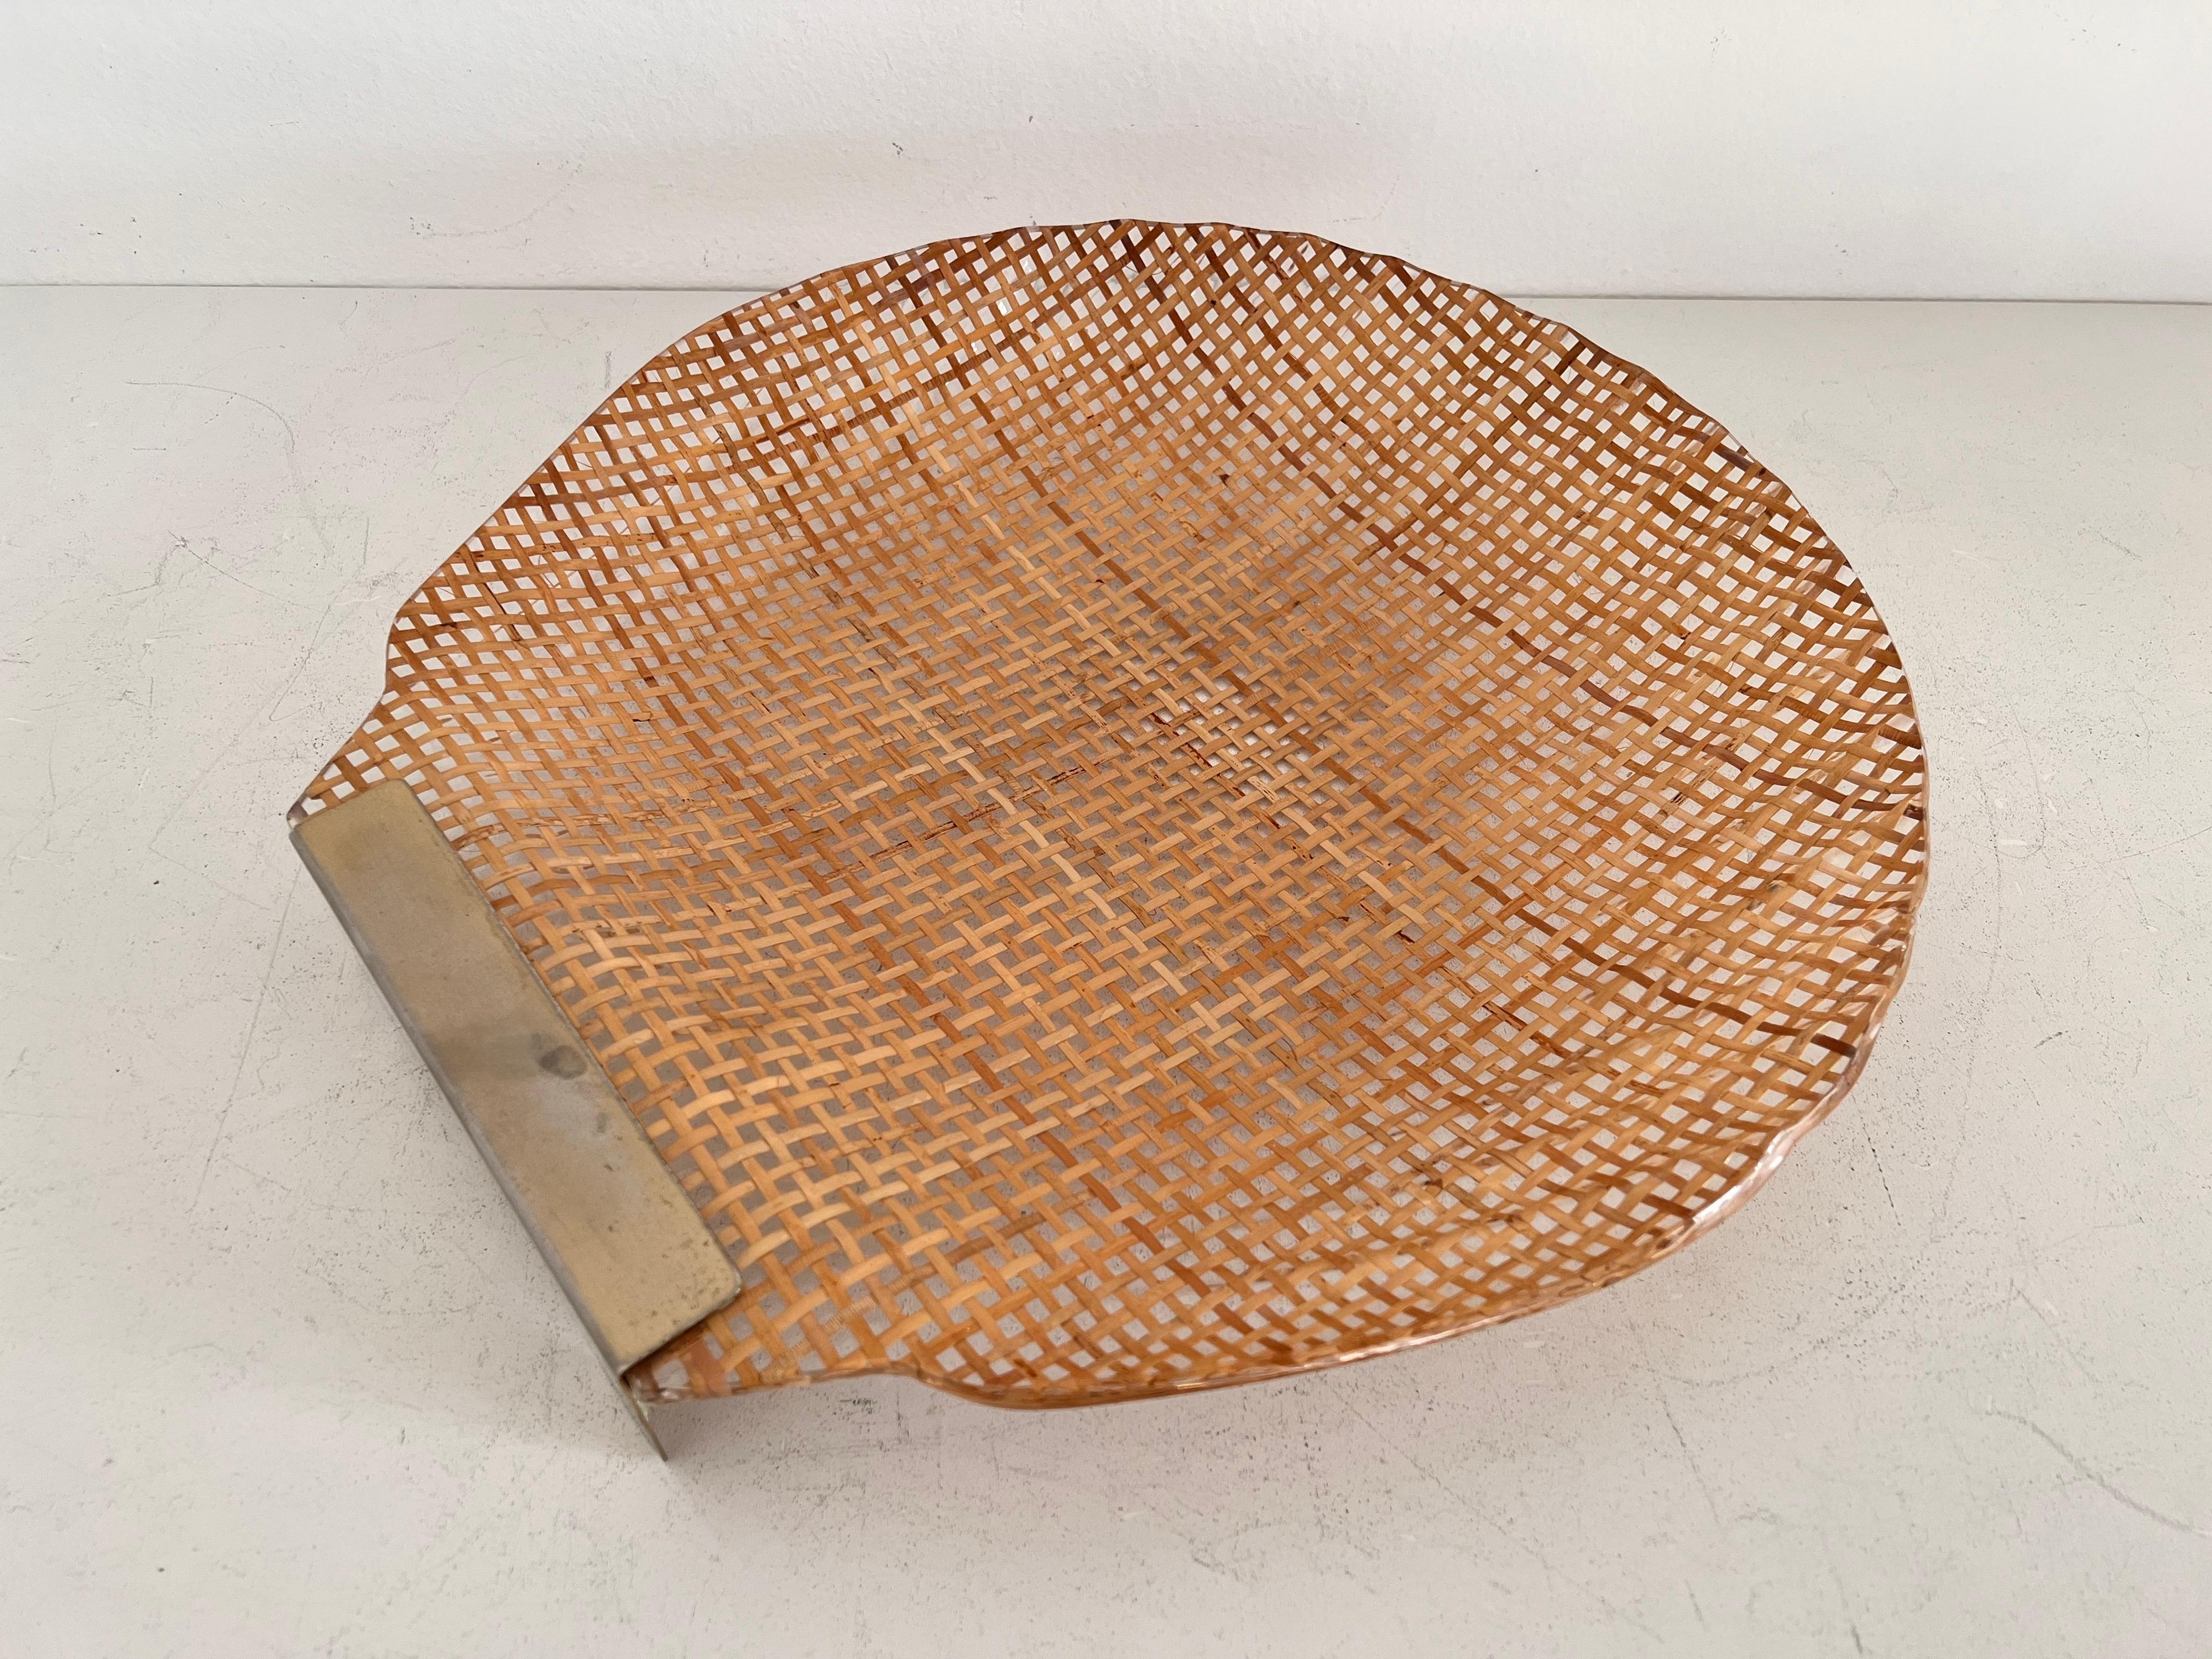 Italian MidCentury Serving Tray in Lucite, Rattan and Brass in Shell Shape, 1970 For Sale 10